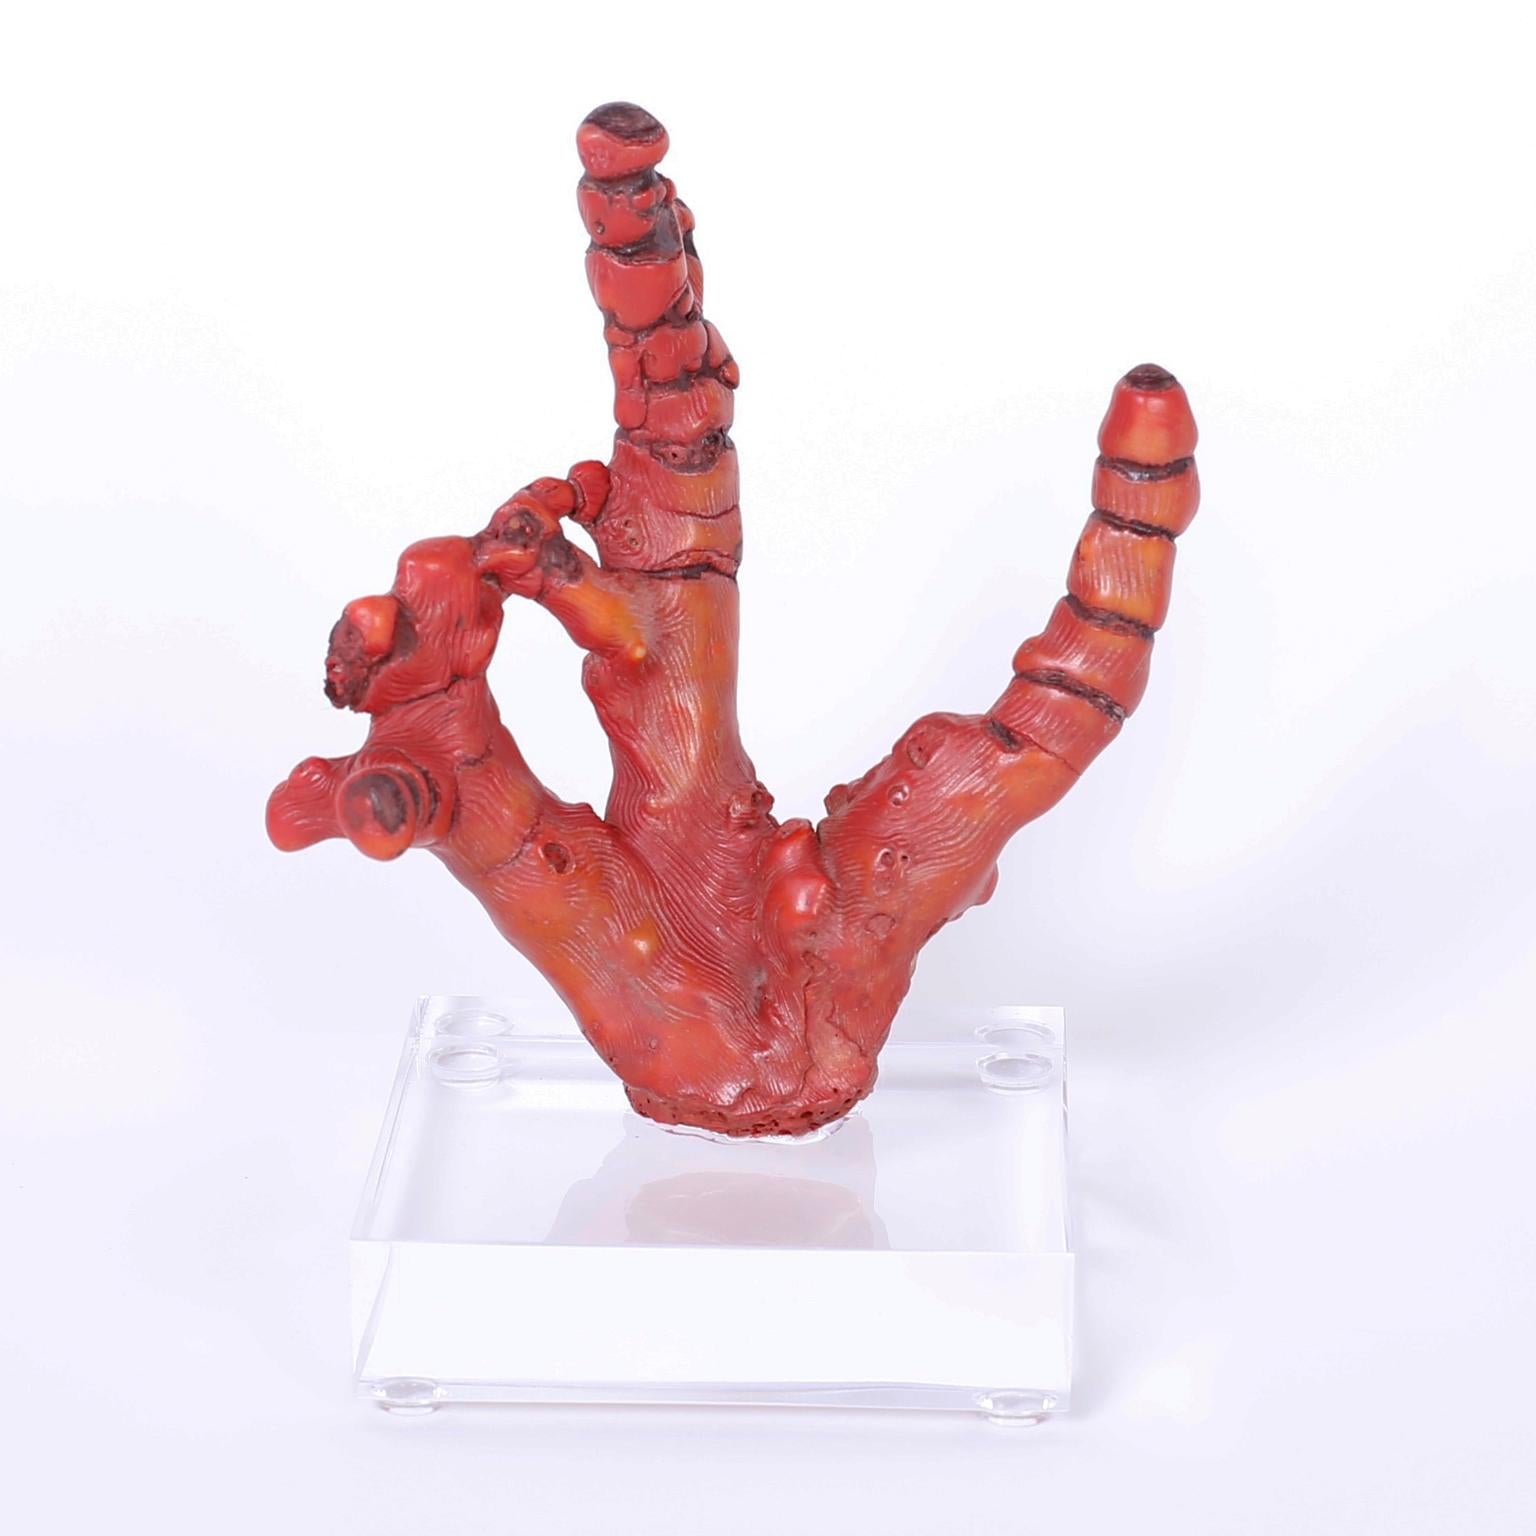 Pair of ancient Chinese bamboo red coral fossils with their iconic tropical color and organic sculptural form. Presented on custom Lucite stands.

Measures from left to right:

3856E: H: 7, W: 5 D: 4 
3856F: H: 7.5, W: 5 D: 4.